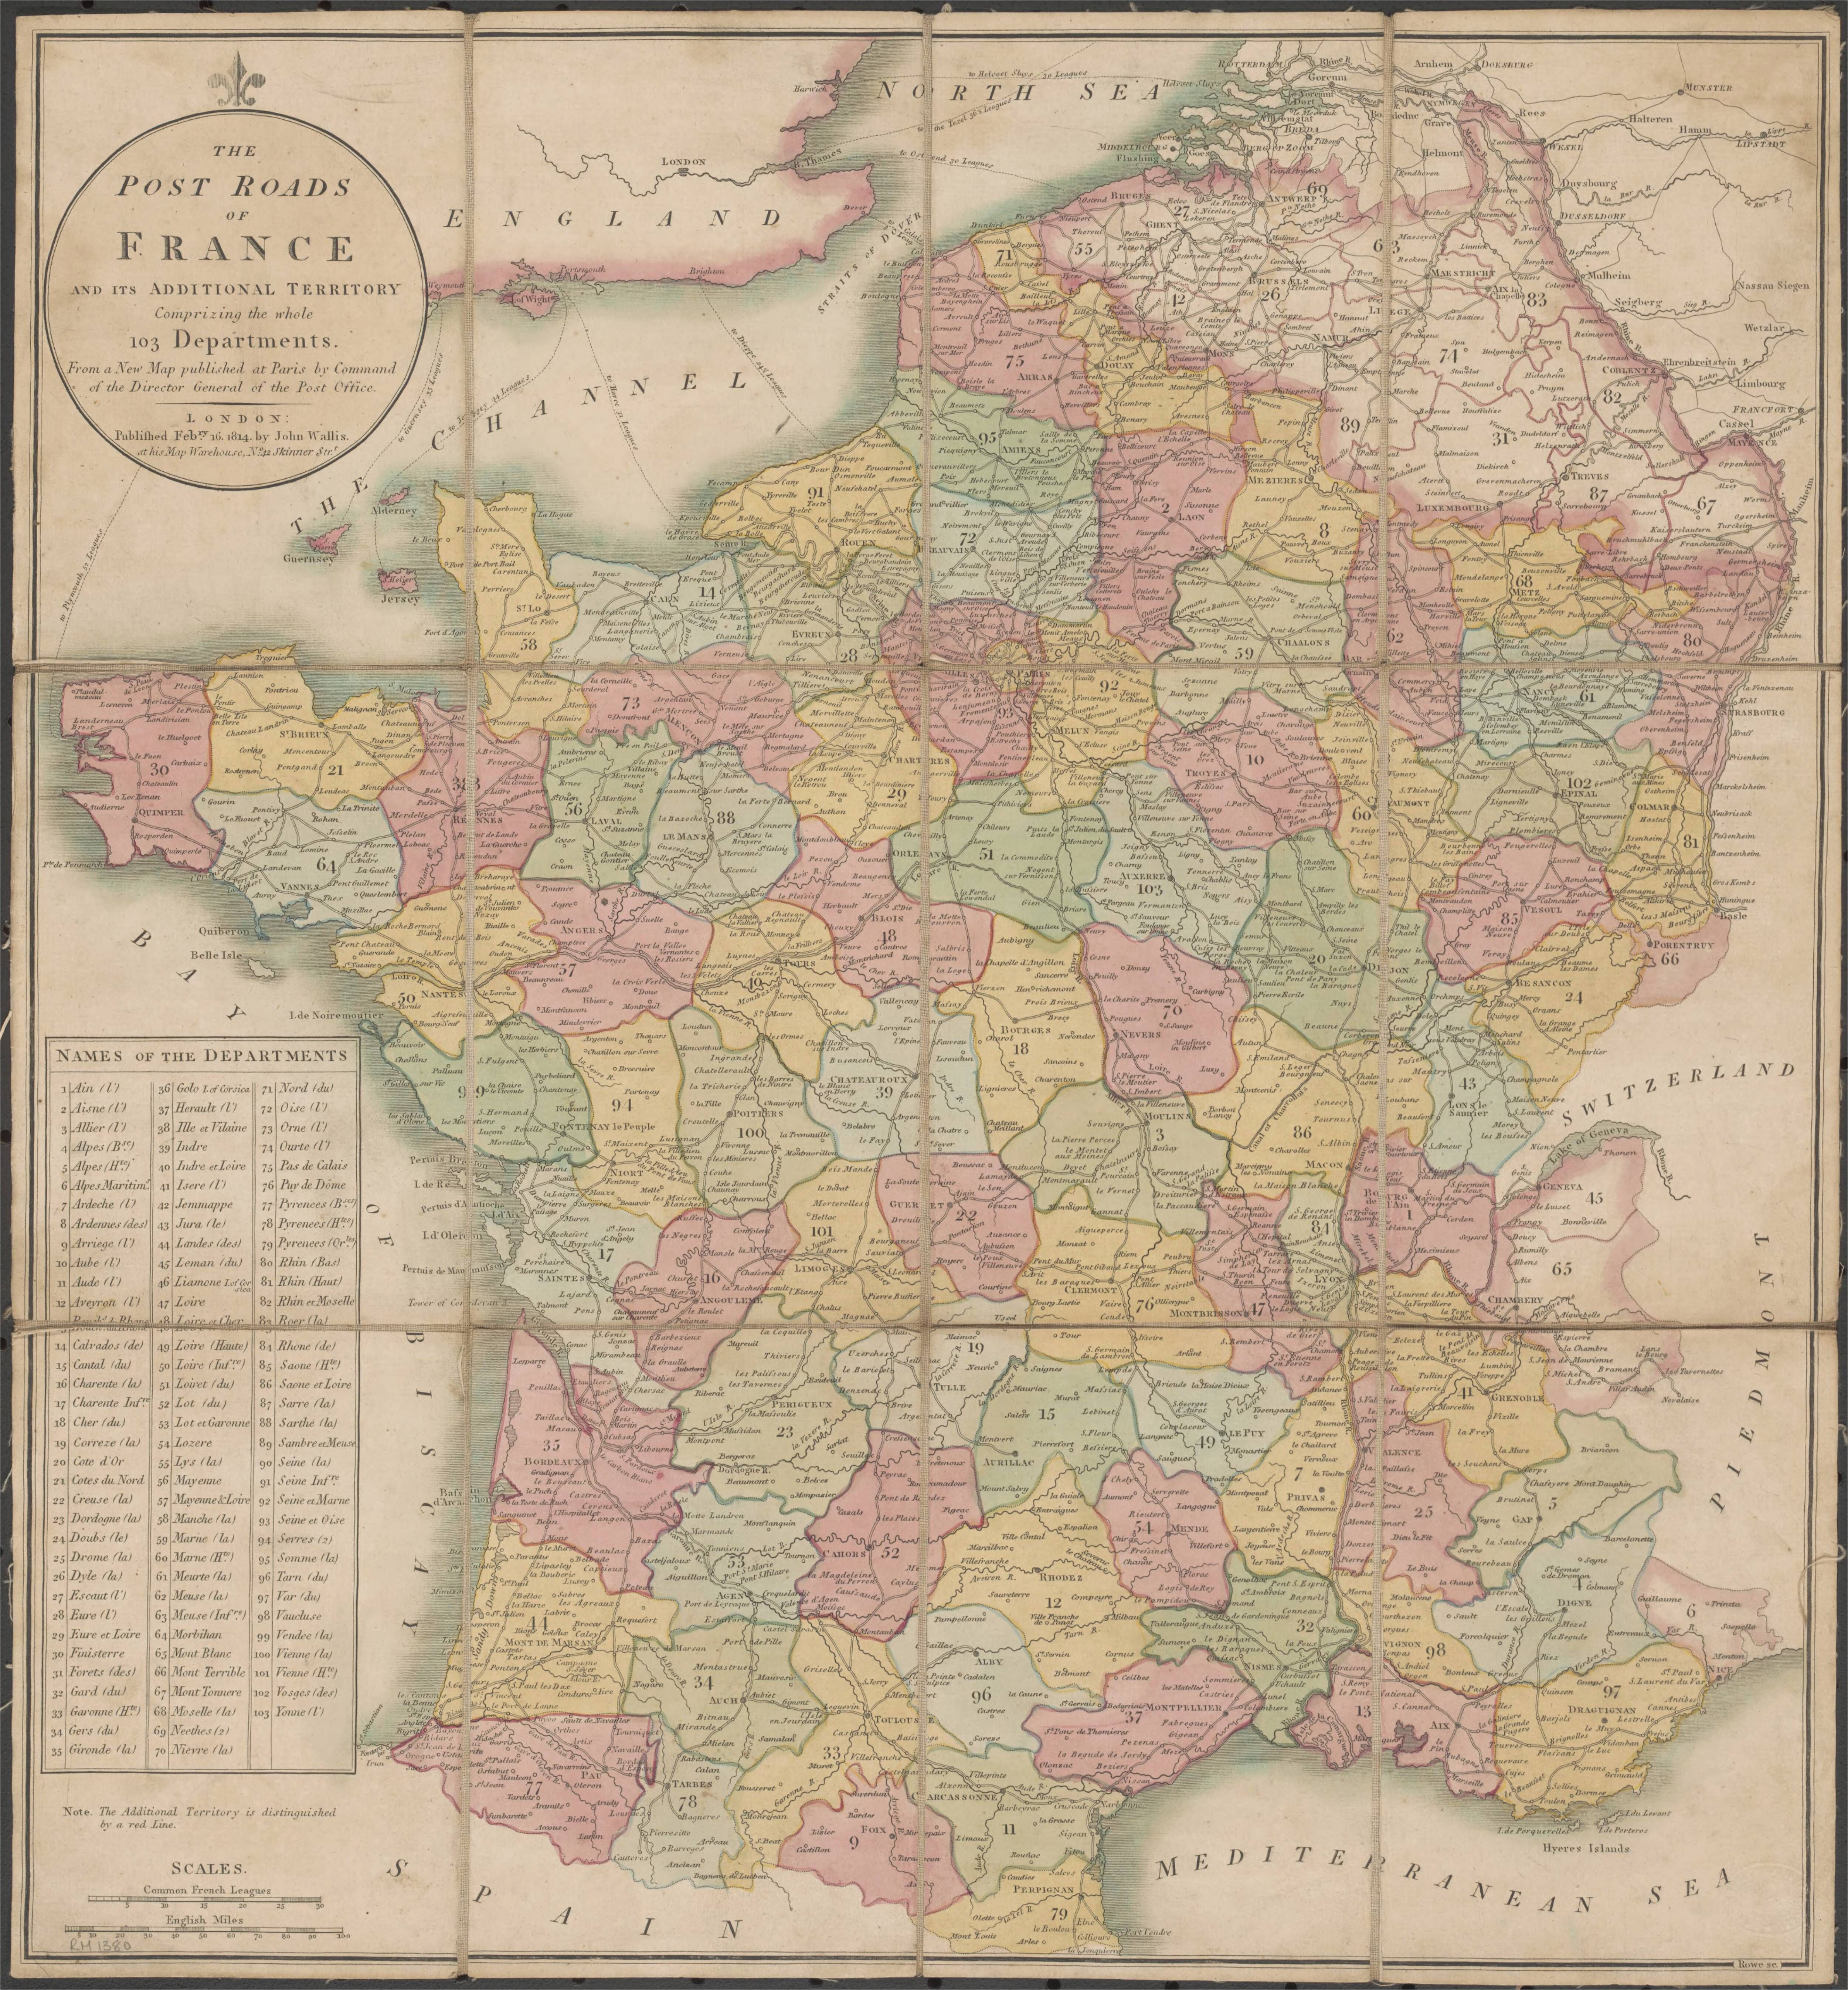 1814 the post roads of france and its additional territory